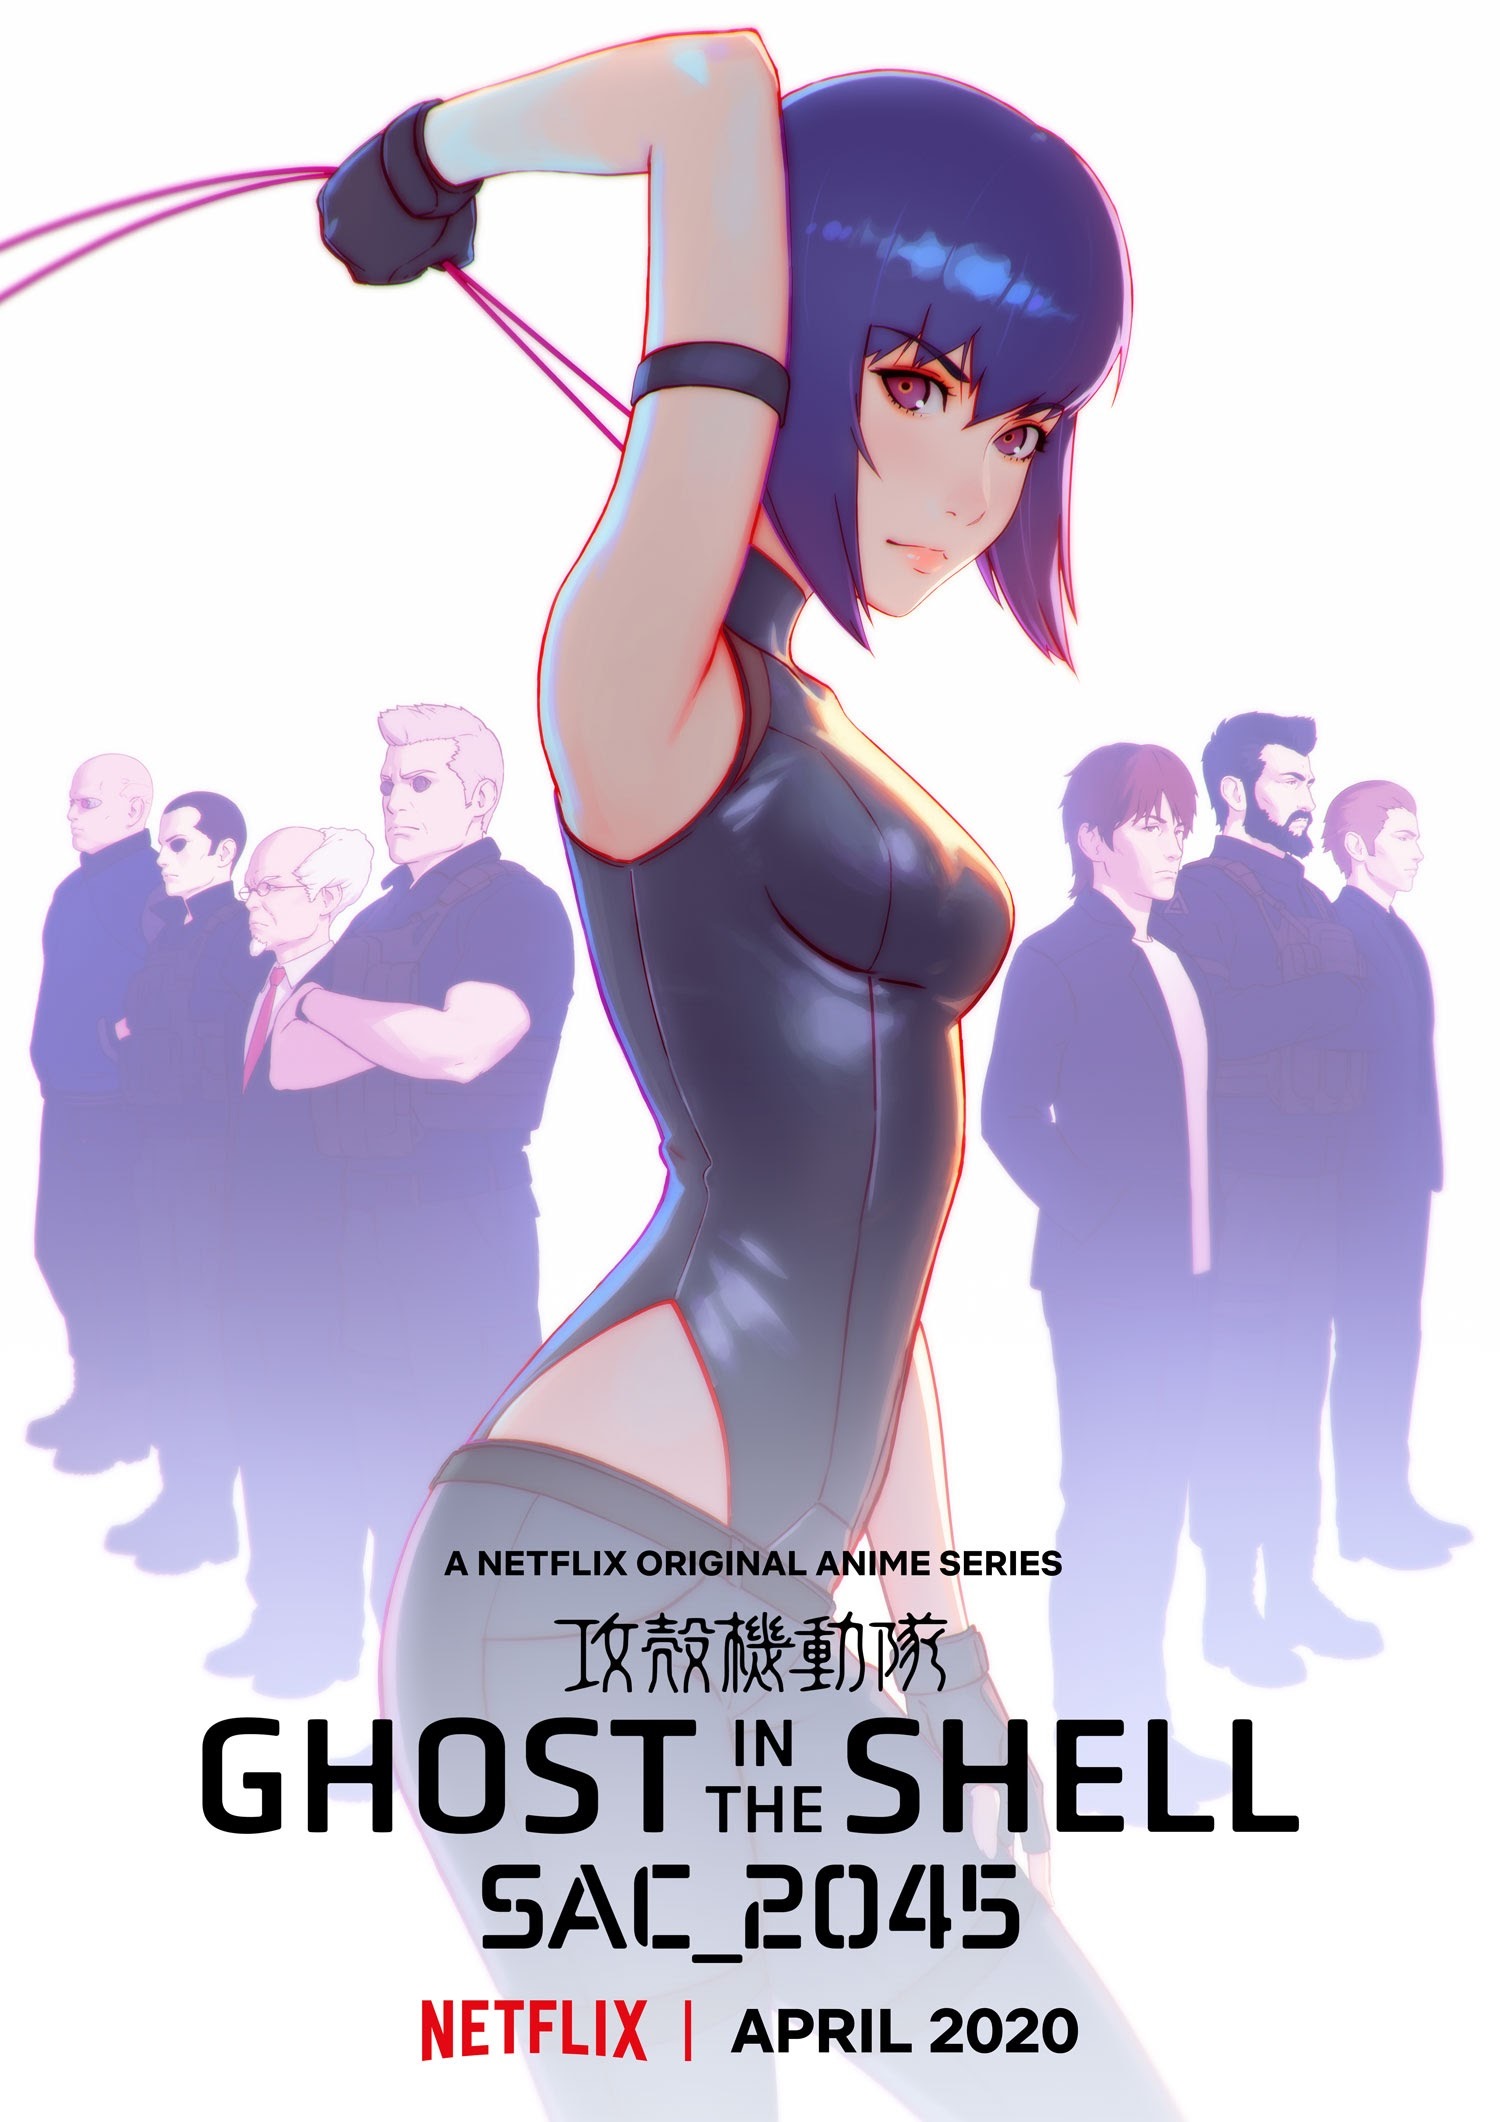 Mega Sized TV Poster Image for Ghost in the Shell SAC_2045 (#1 of 5)